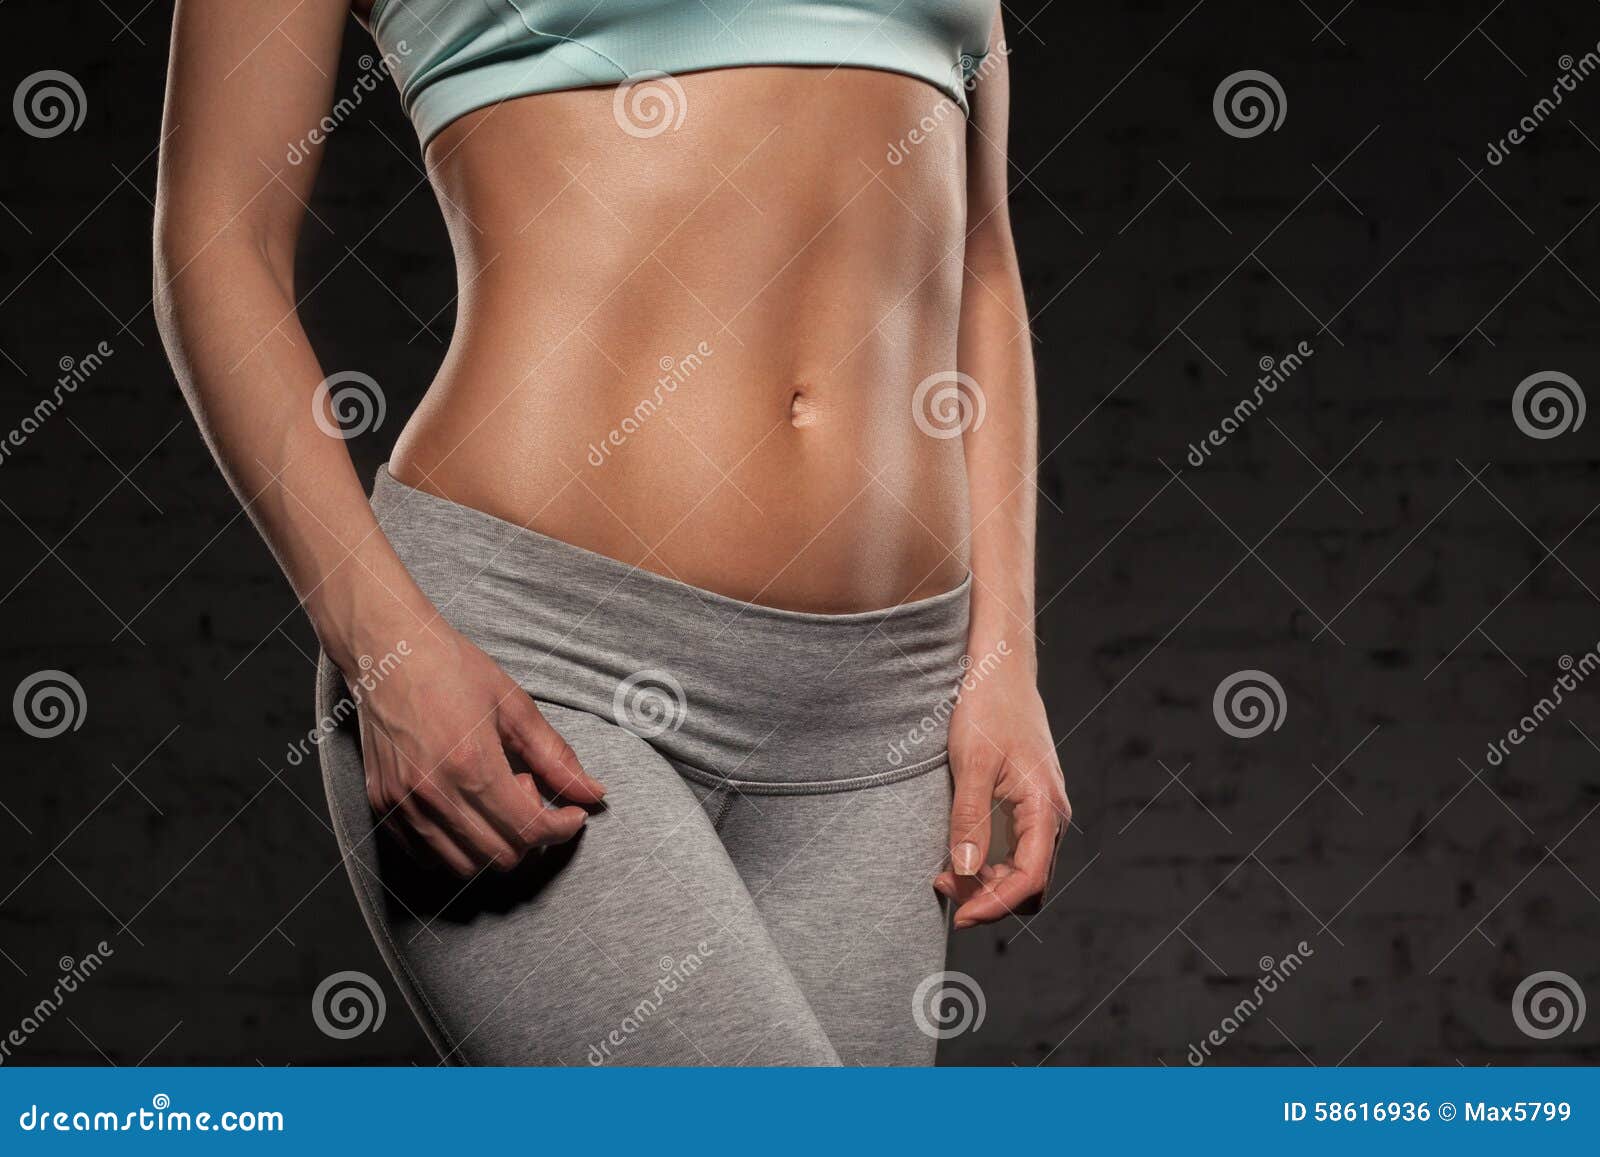 fitness female woman with muscular body, do her workout, abs, abdominals